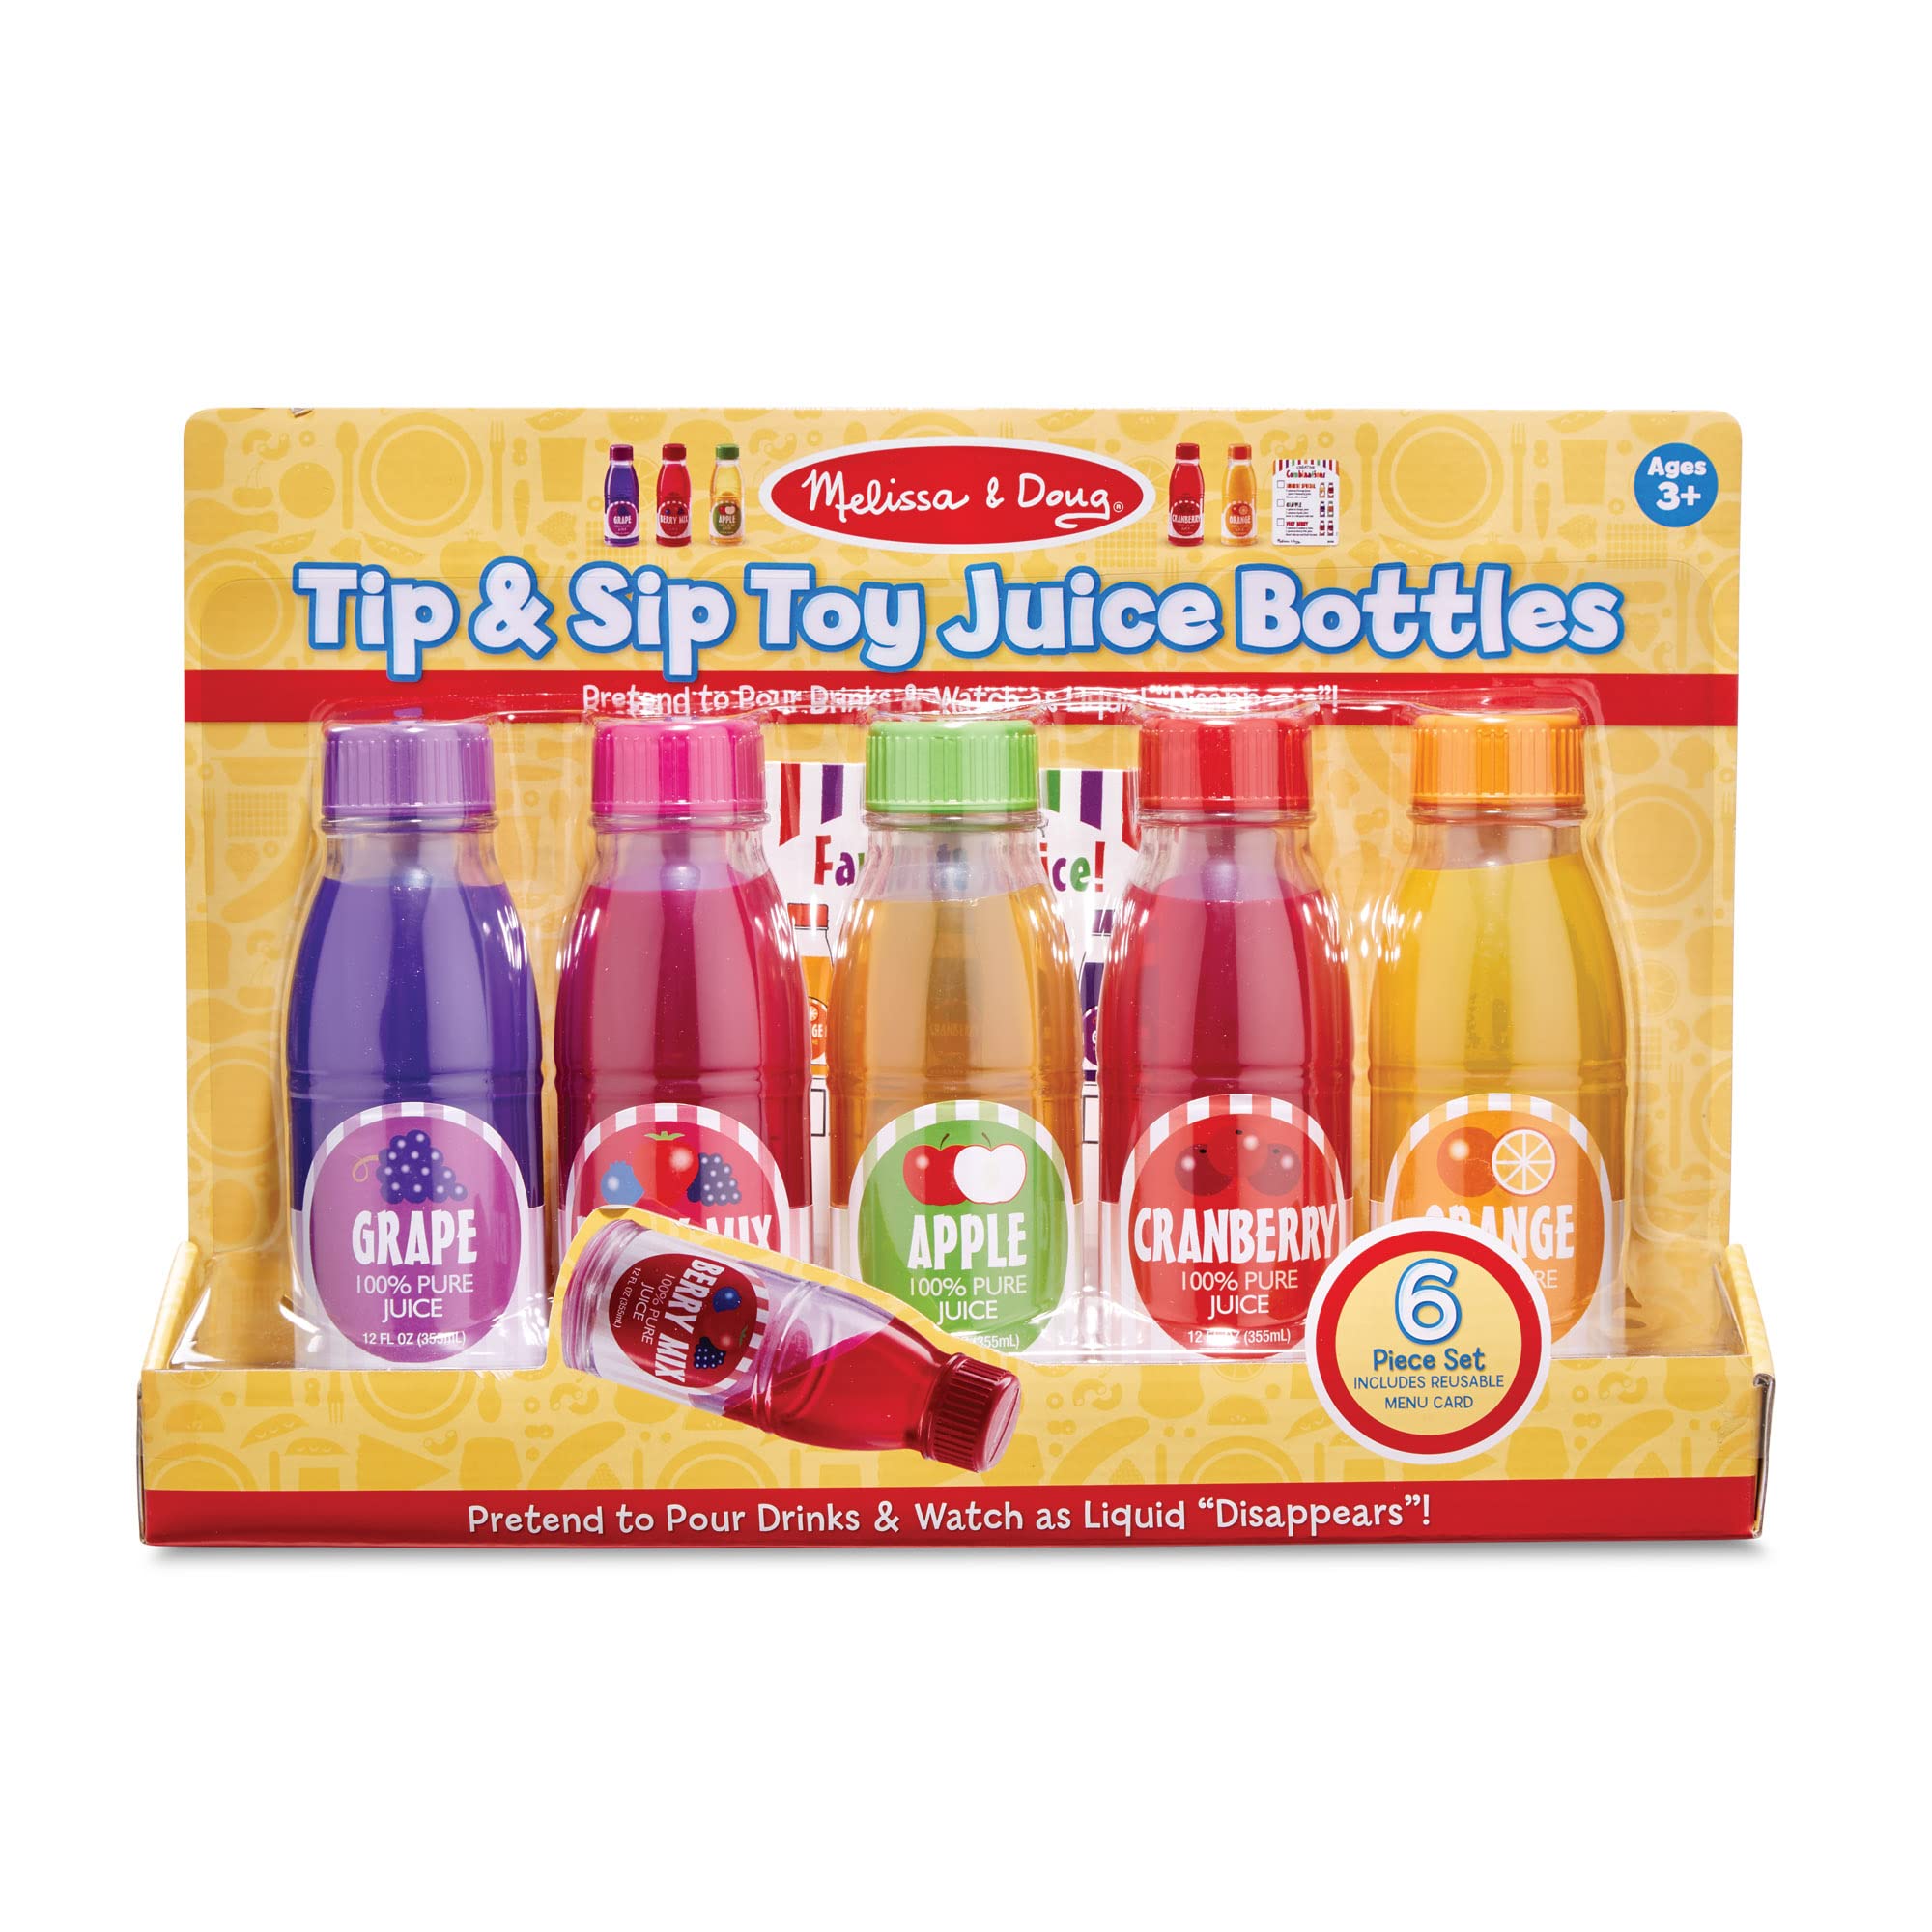 Melissa & Doug Tip & Sip Toy Juice Bottles and Activity Card (6 Pcs) - Pretend Play Food Set, Play Kitchen Food For Ages 3+